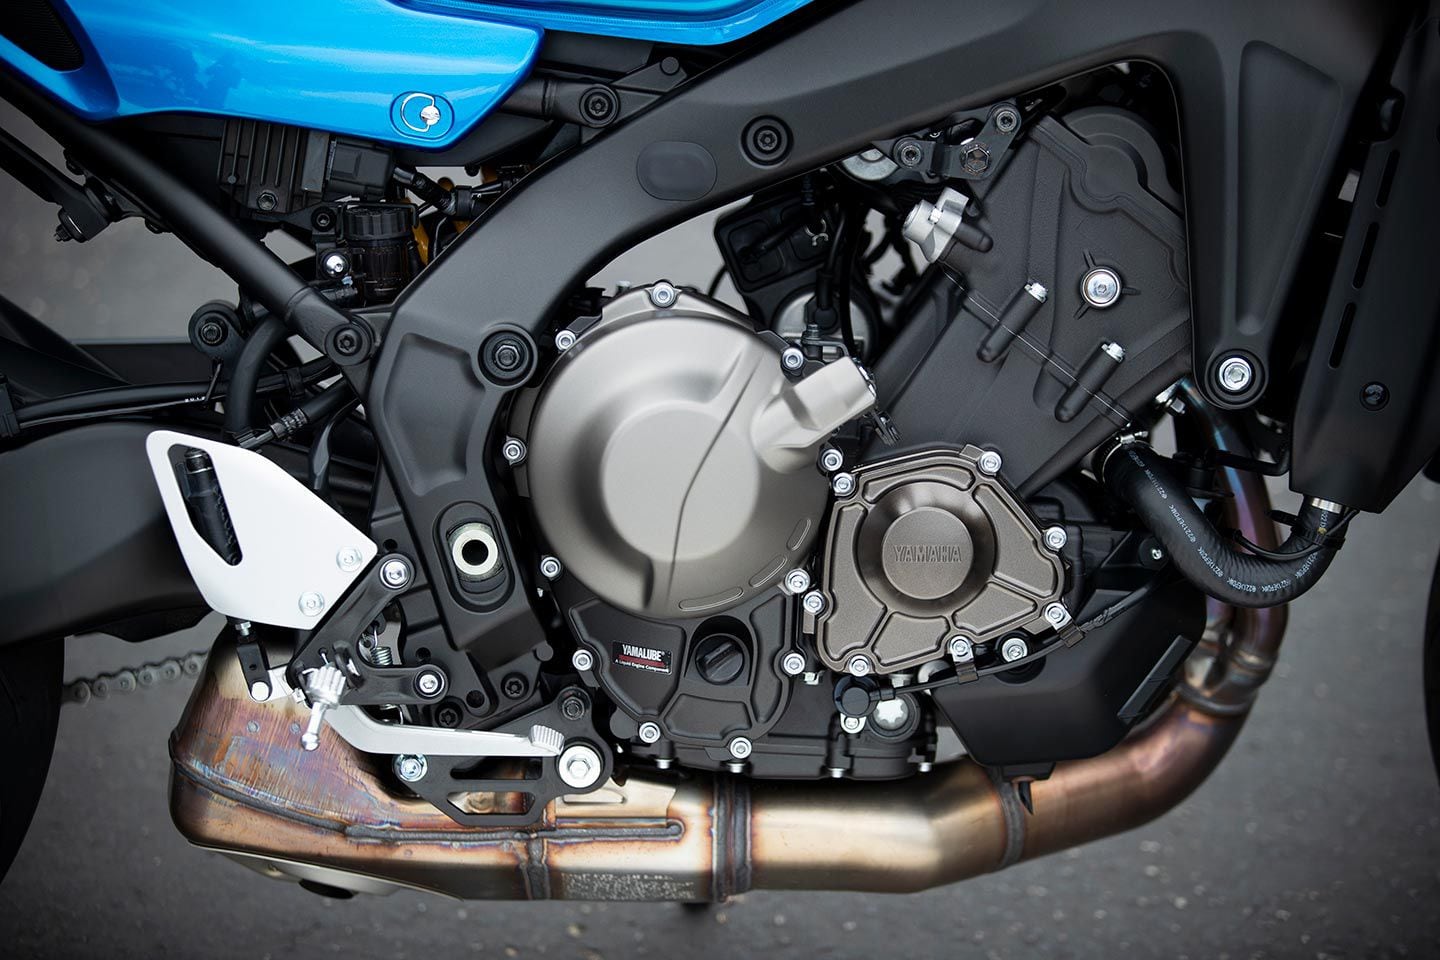 Almost every part of Yamaha’s 890cc three-cylinder engine was revamped in 2021, from the pistons and connecting rods to the crankshaft, camshafts, and crankcase. Ultimately, that’s the engine Yamaha would use in the XSR900 starting in 2022.